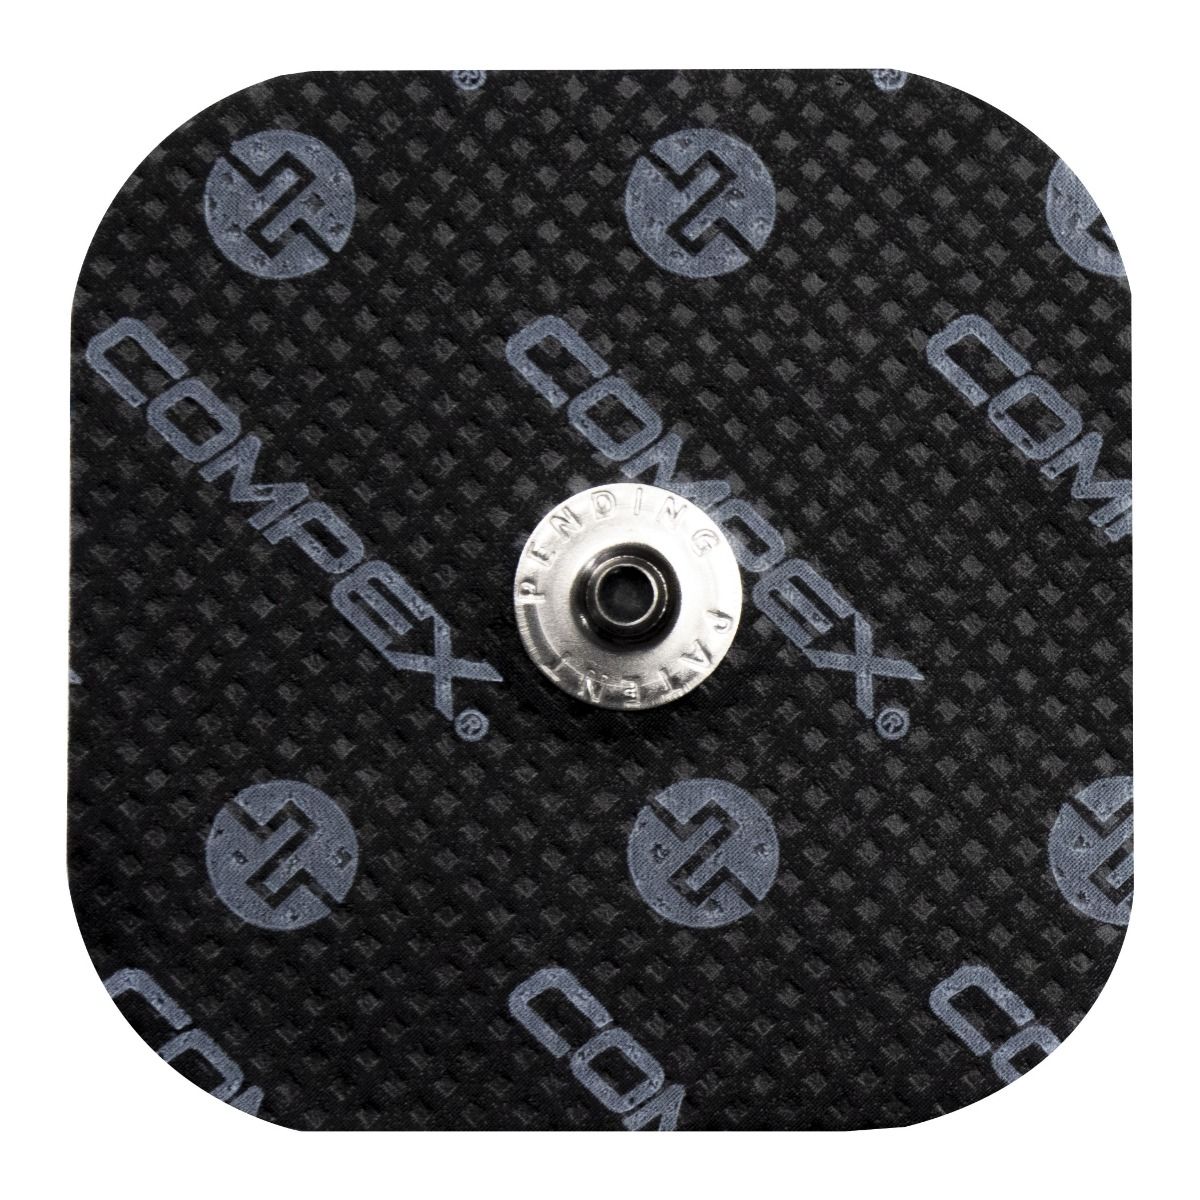 Compex Snap Performance Self-Adhesive Electrodes